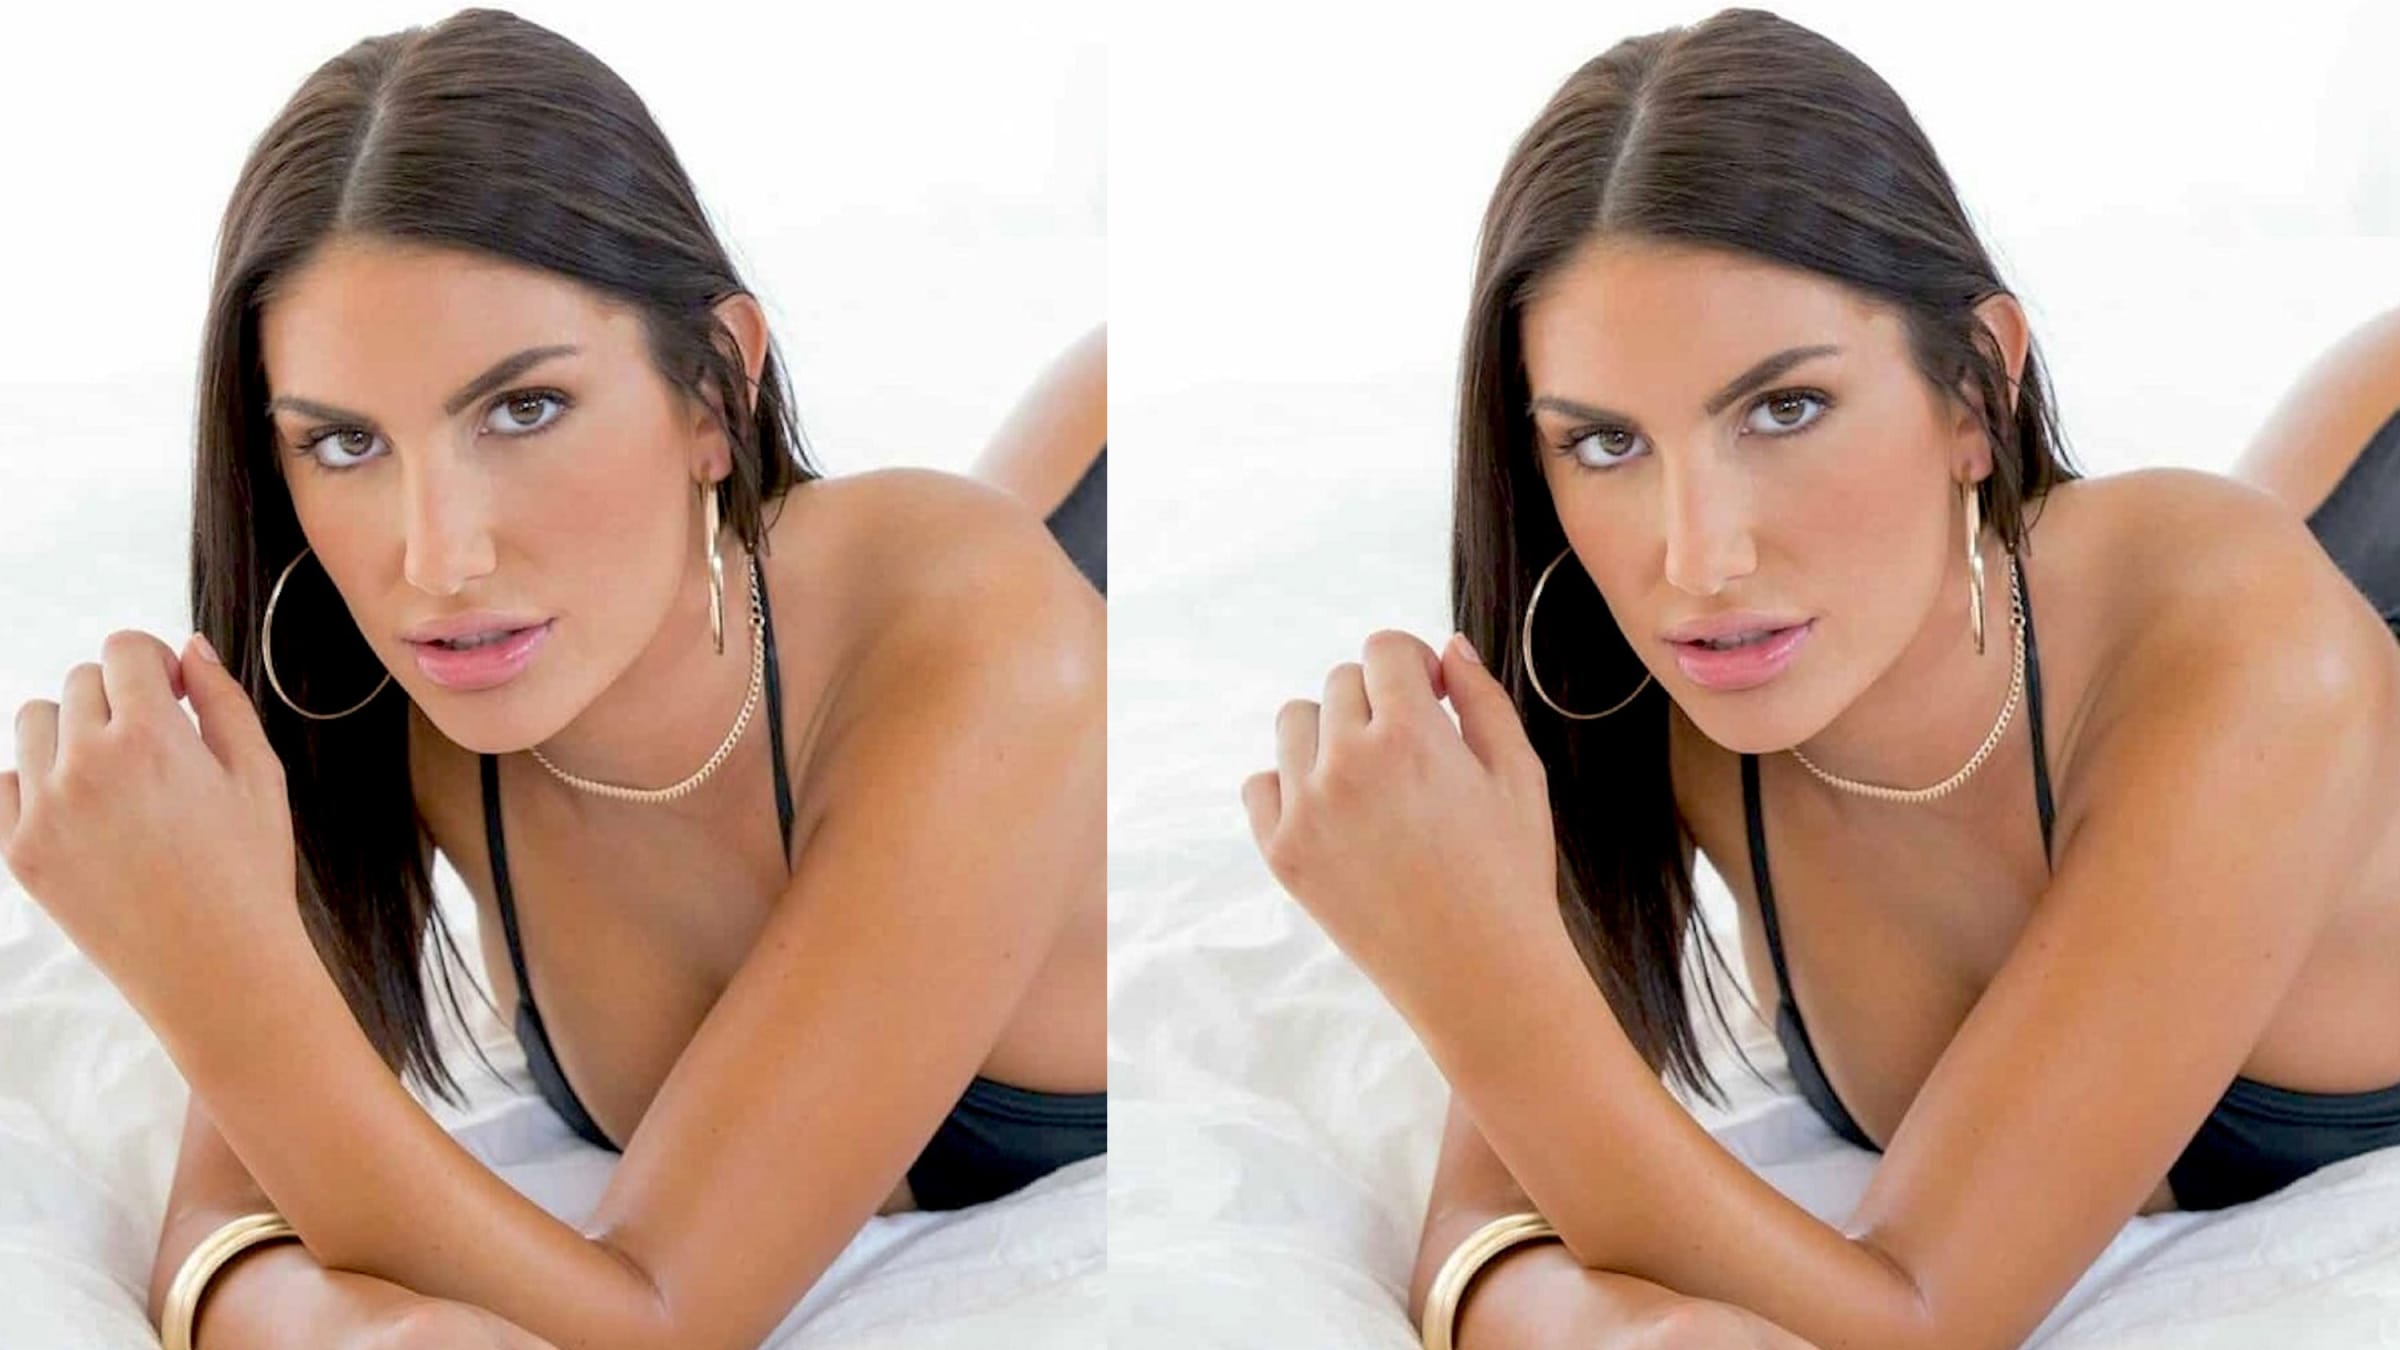 August Ames Porn - Mother of 'Cyberbullied' Porn Star August Ames Opens Up About Her Last Days